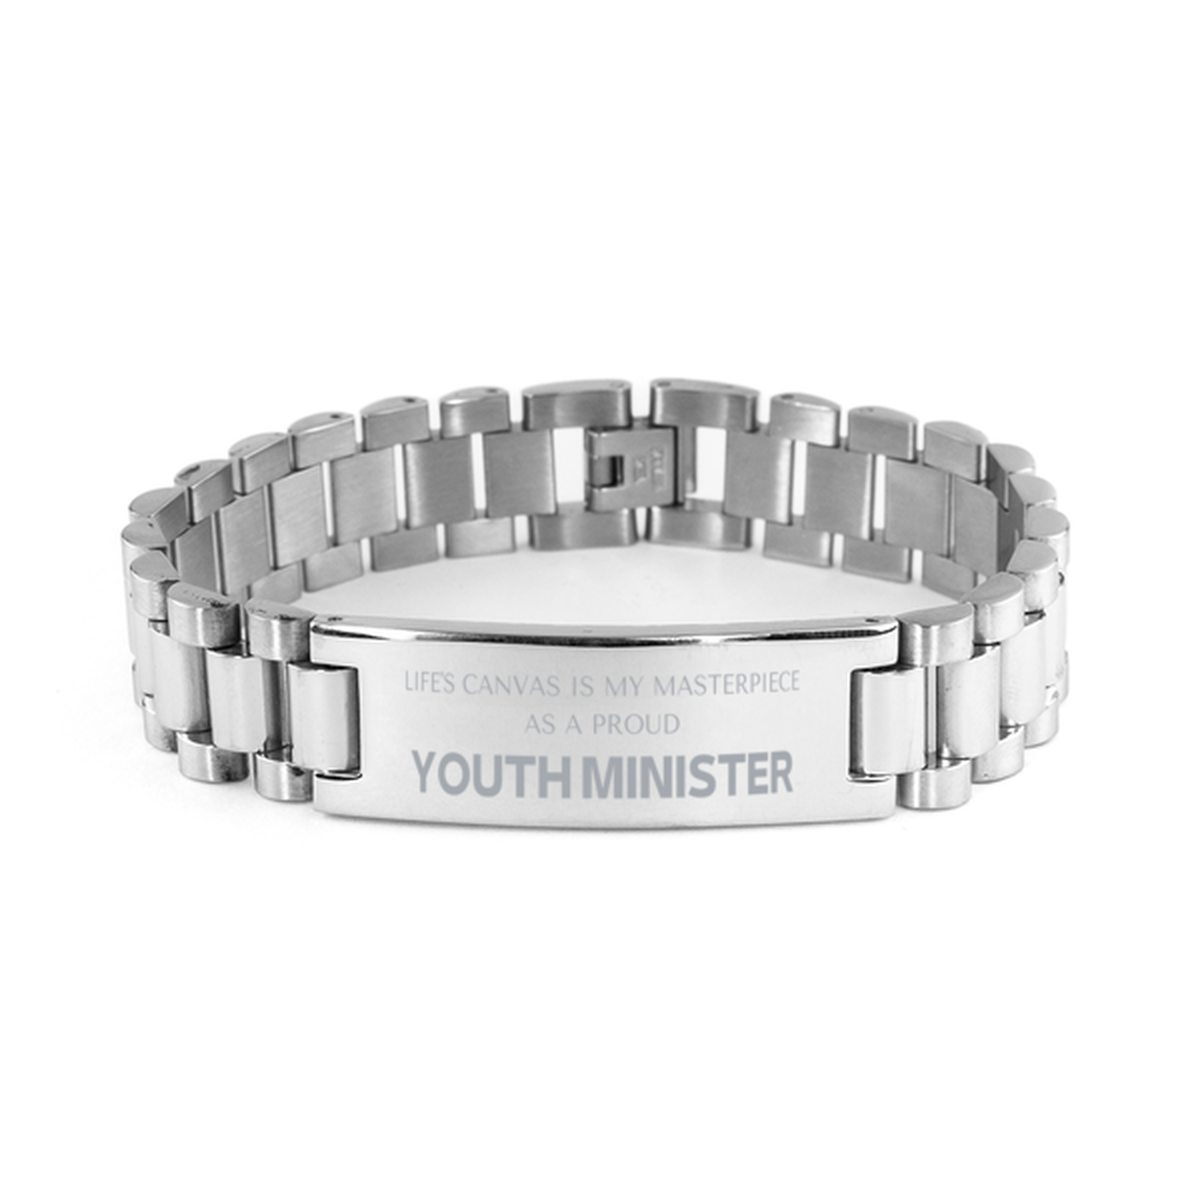 Proud Youth Minister Gifts, Life's canvas is my masterpiece, Epic Birthday Christmas Unique Ladder Stainless Steel Bracelet For Youth Minister, Coworkers, Men, Women, Friends